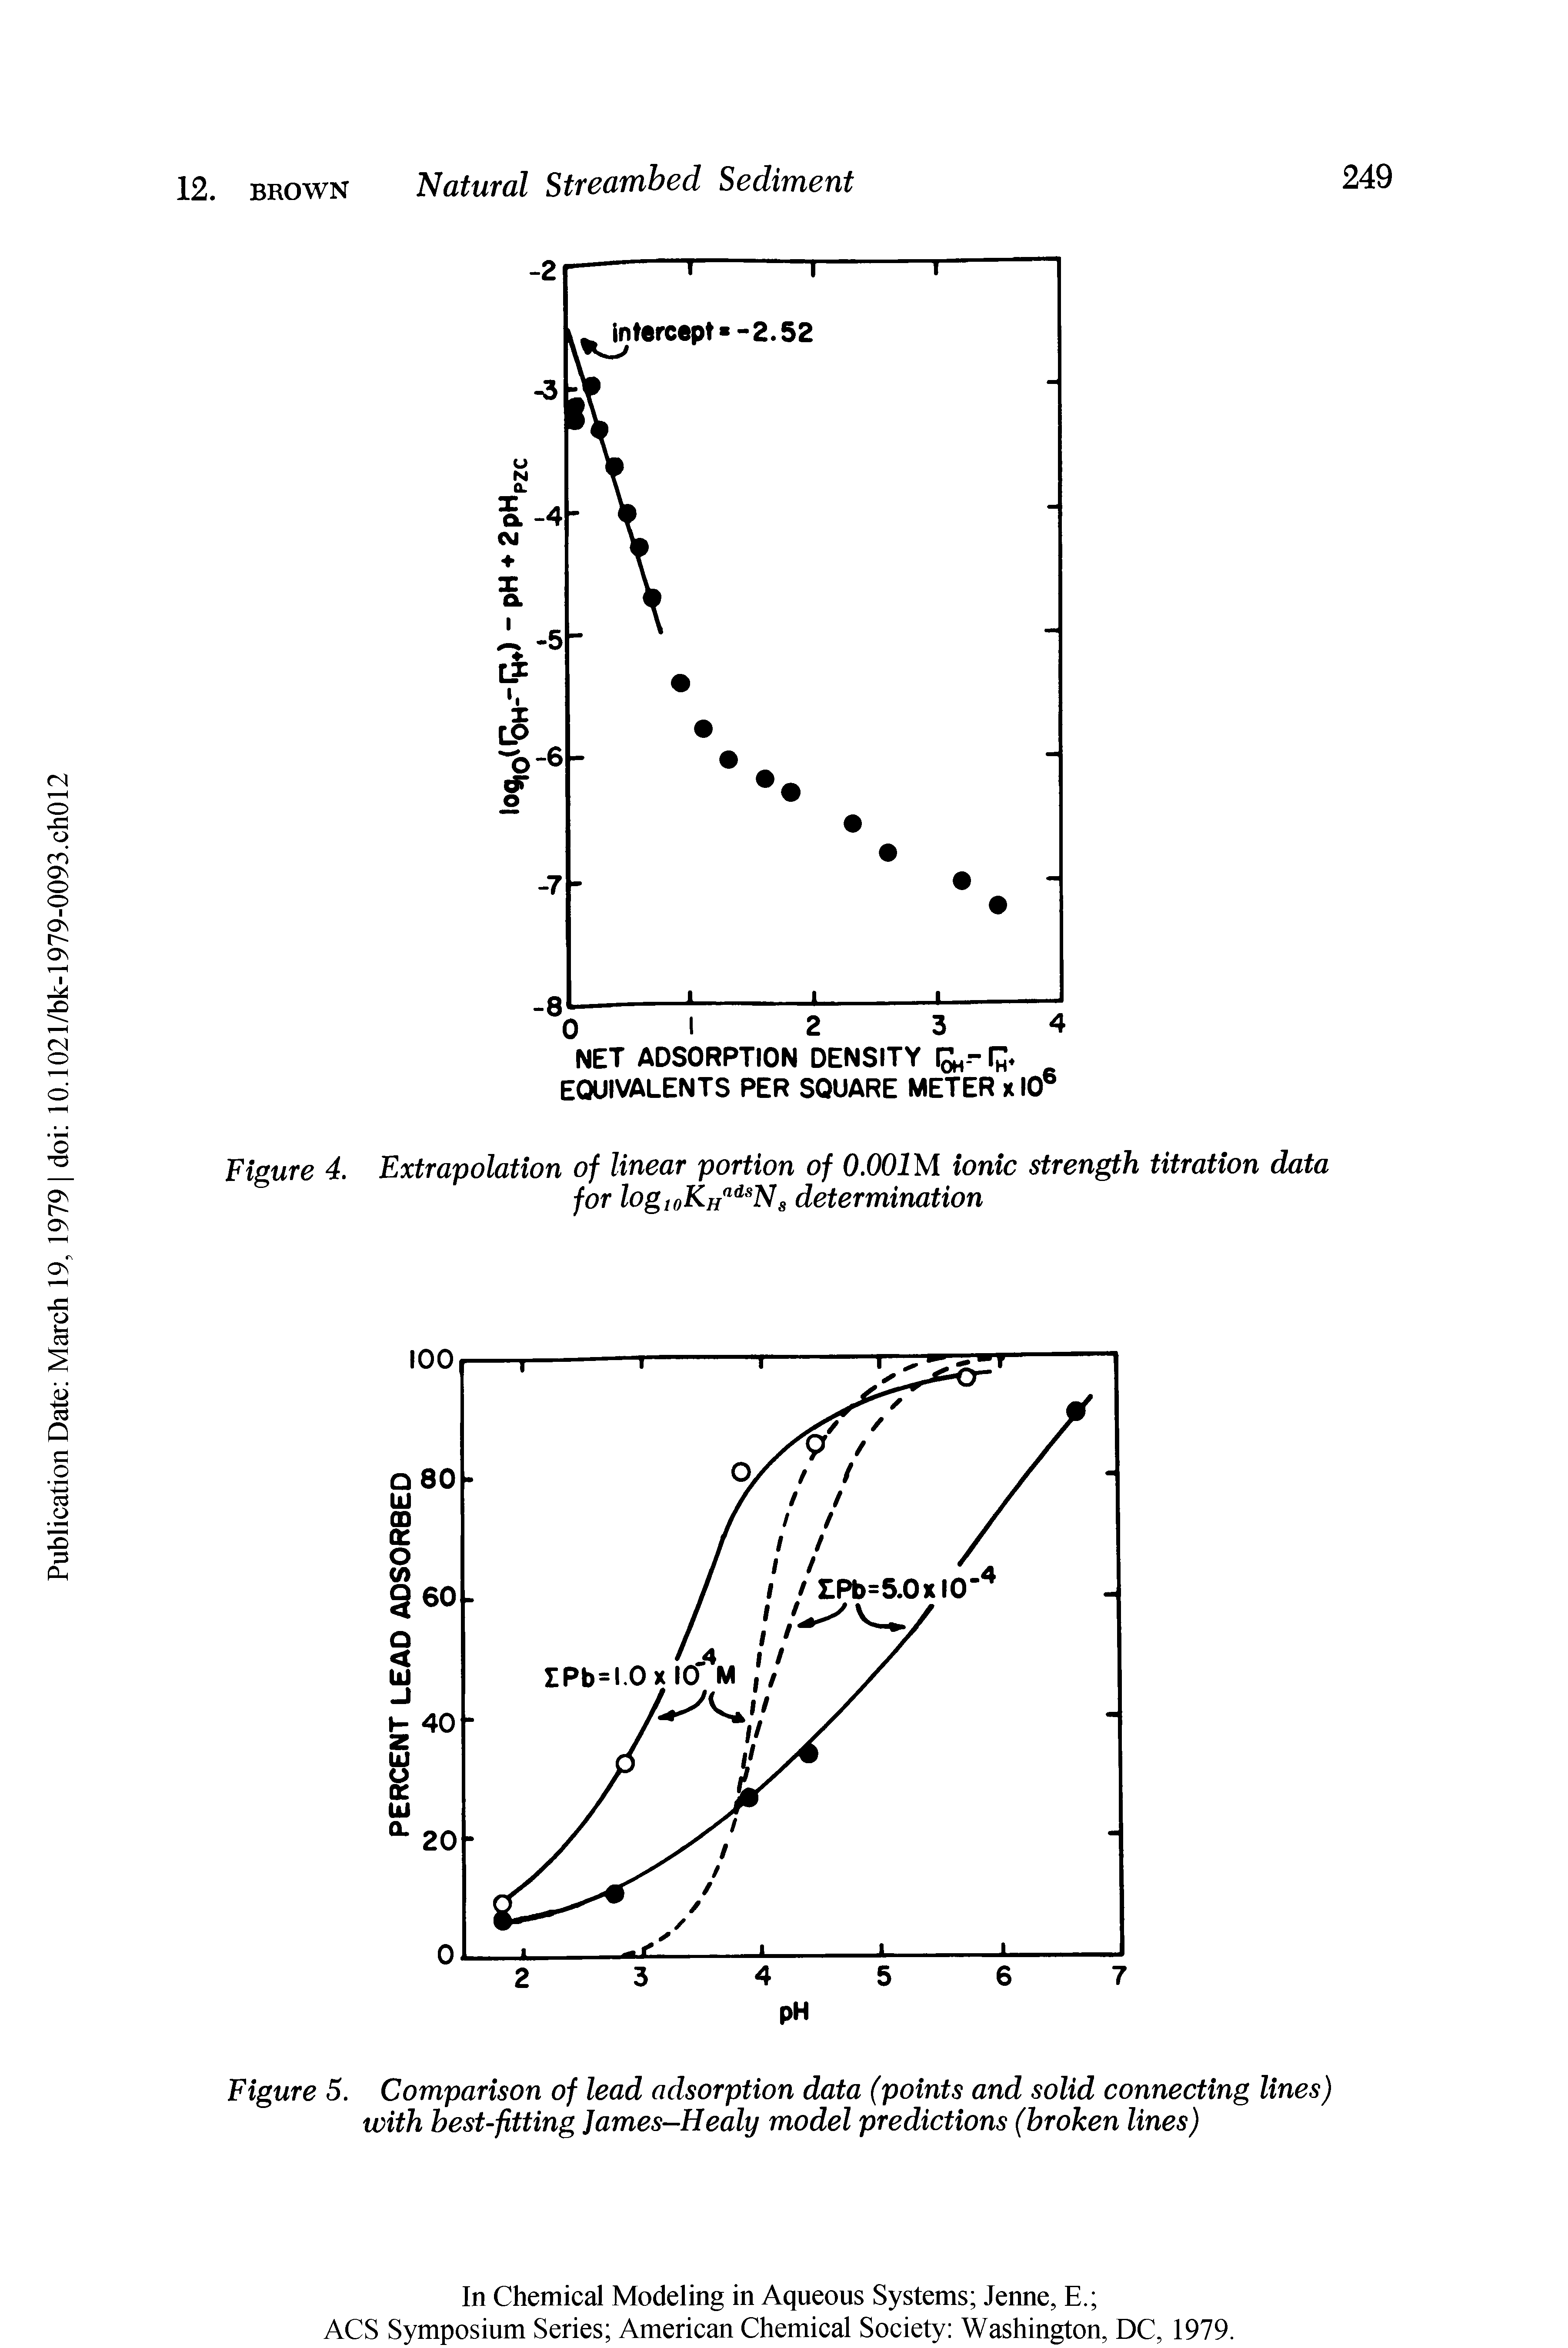 Figure 5. Comparison of lead adsorption data (points and solid connecting lines) with best-fitting James-Healy model predictions (broken lines)...